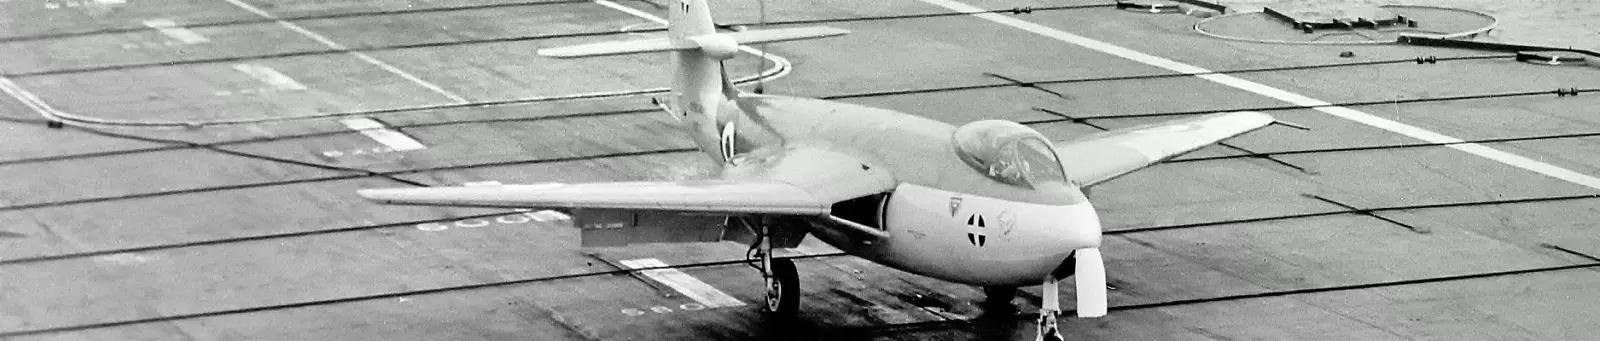 P.1052 (VX272) during carrier test on HMS Eagle (May 1952).png